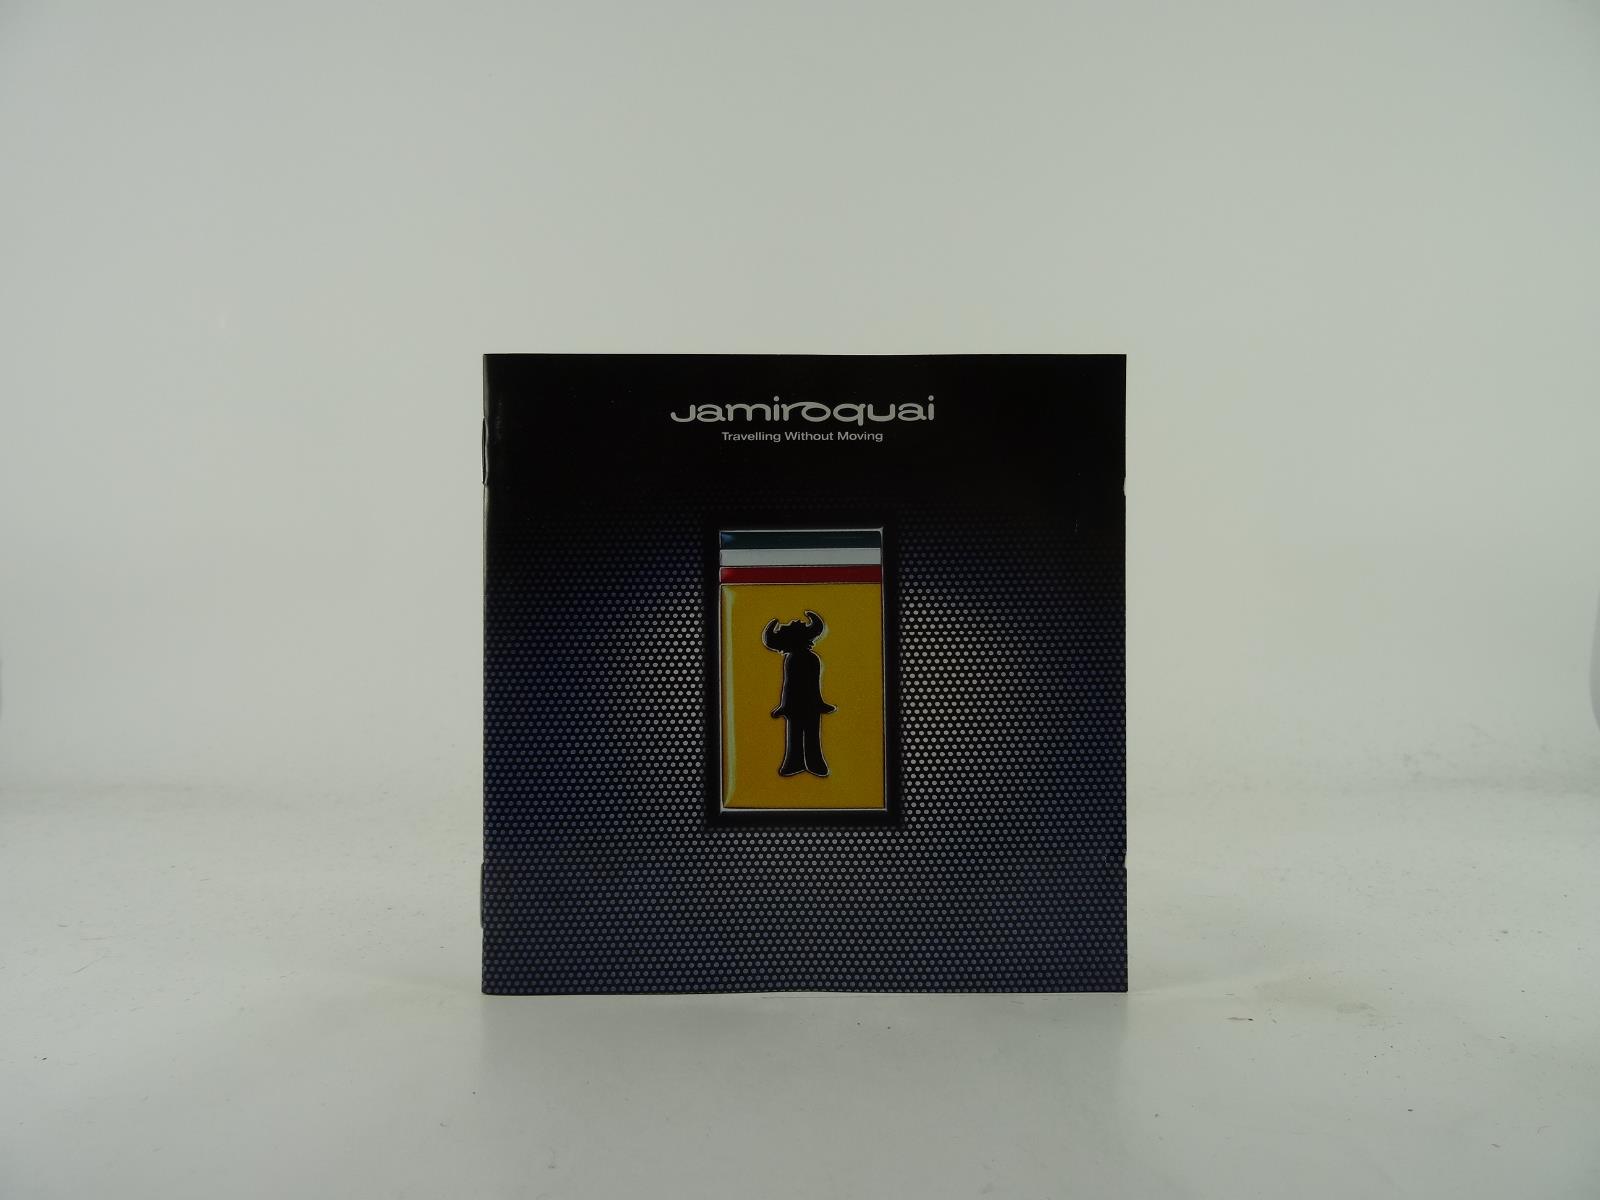 JAMIROQUAI TRAVELLING WITHOUT MOVING 109 (109) 12 Track CD